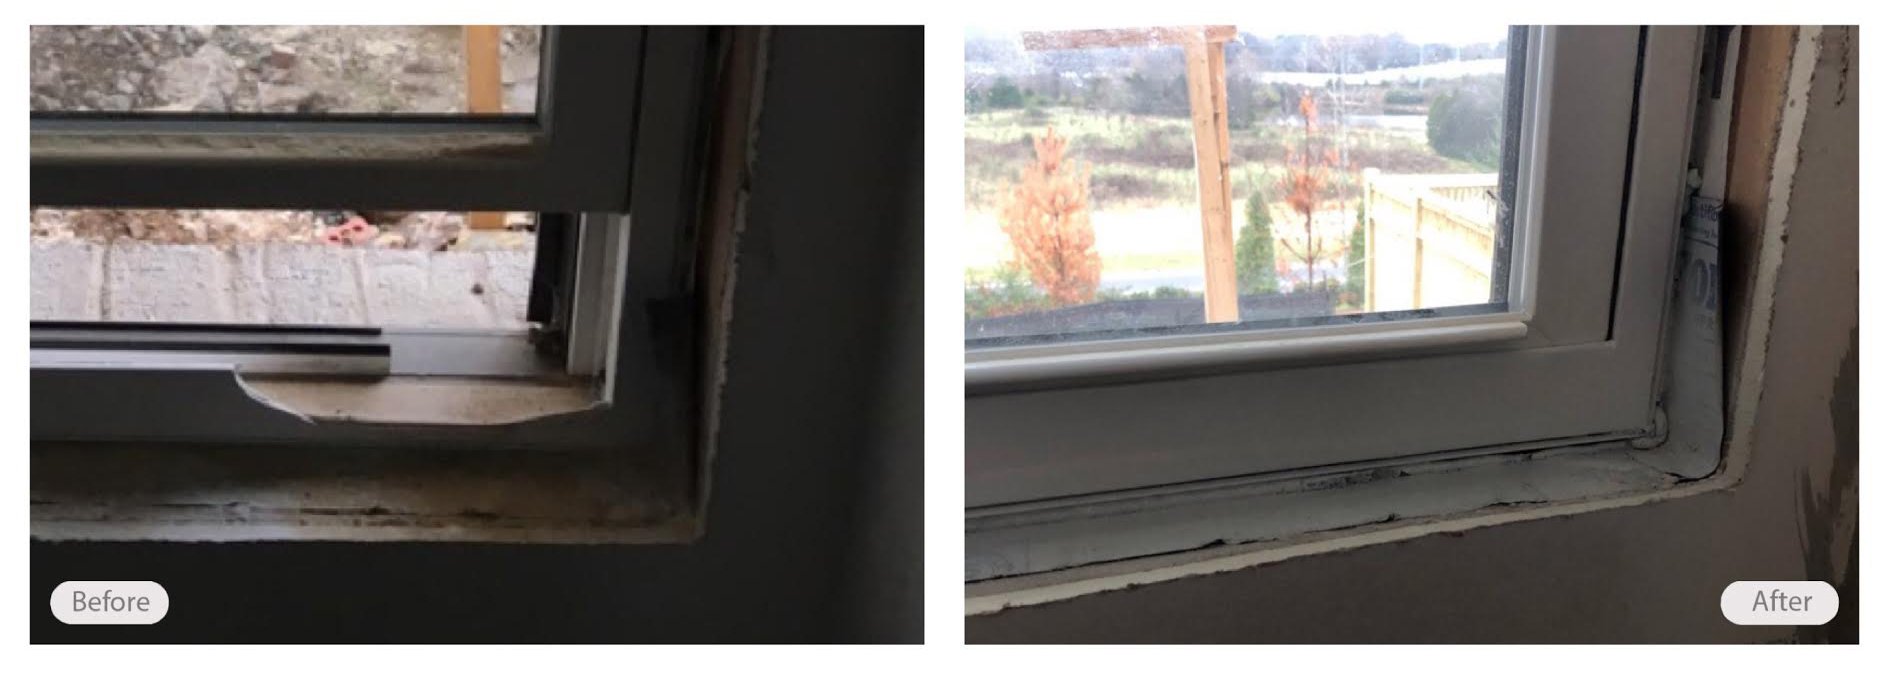 Vinyl window casing repair done in-place, no need to replace